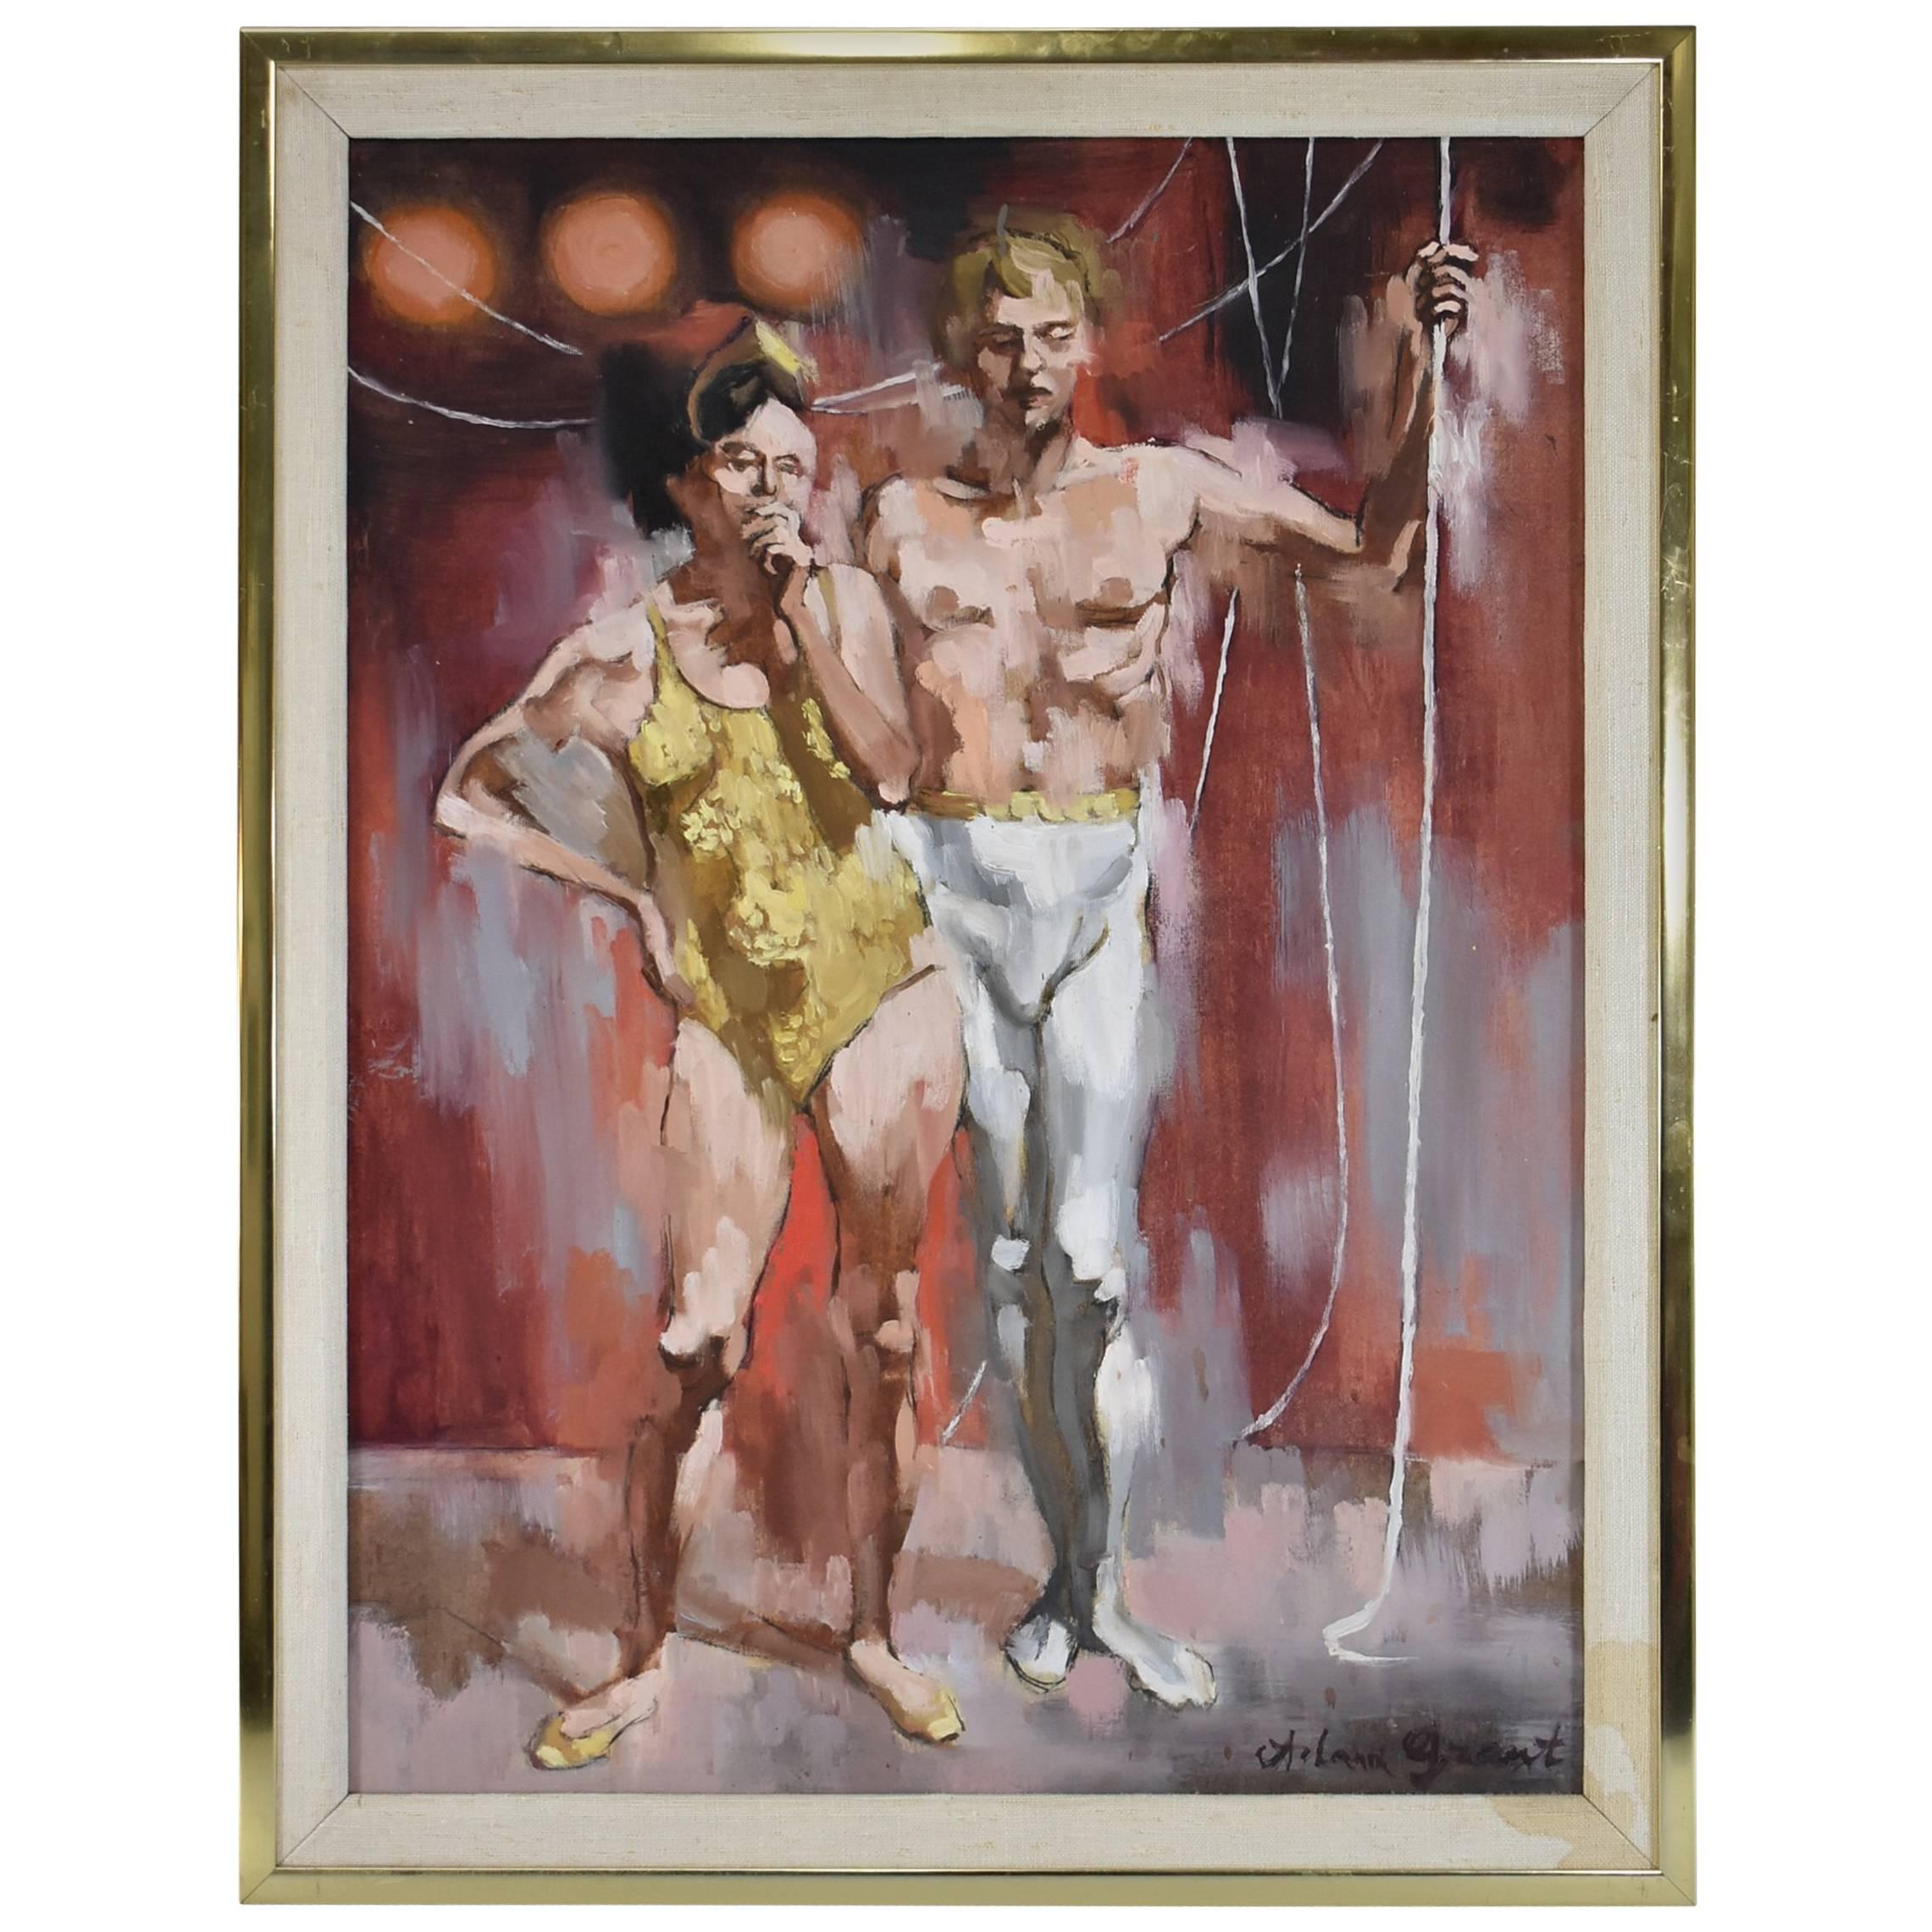 Adam Grant Oil on Board Painting, Titled "Circus Couple"